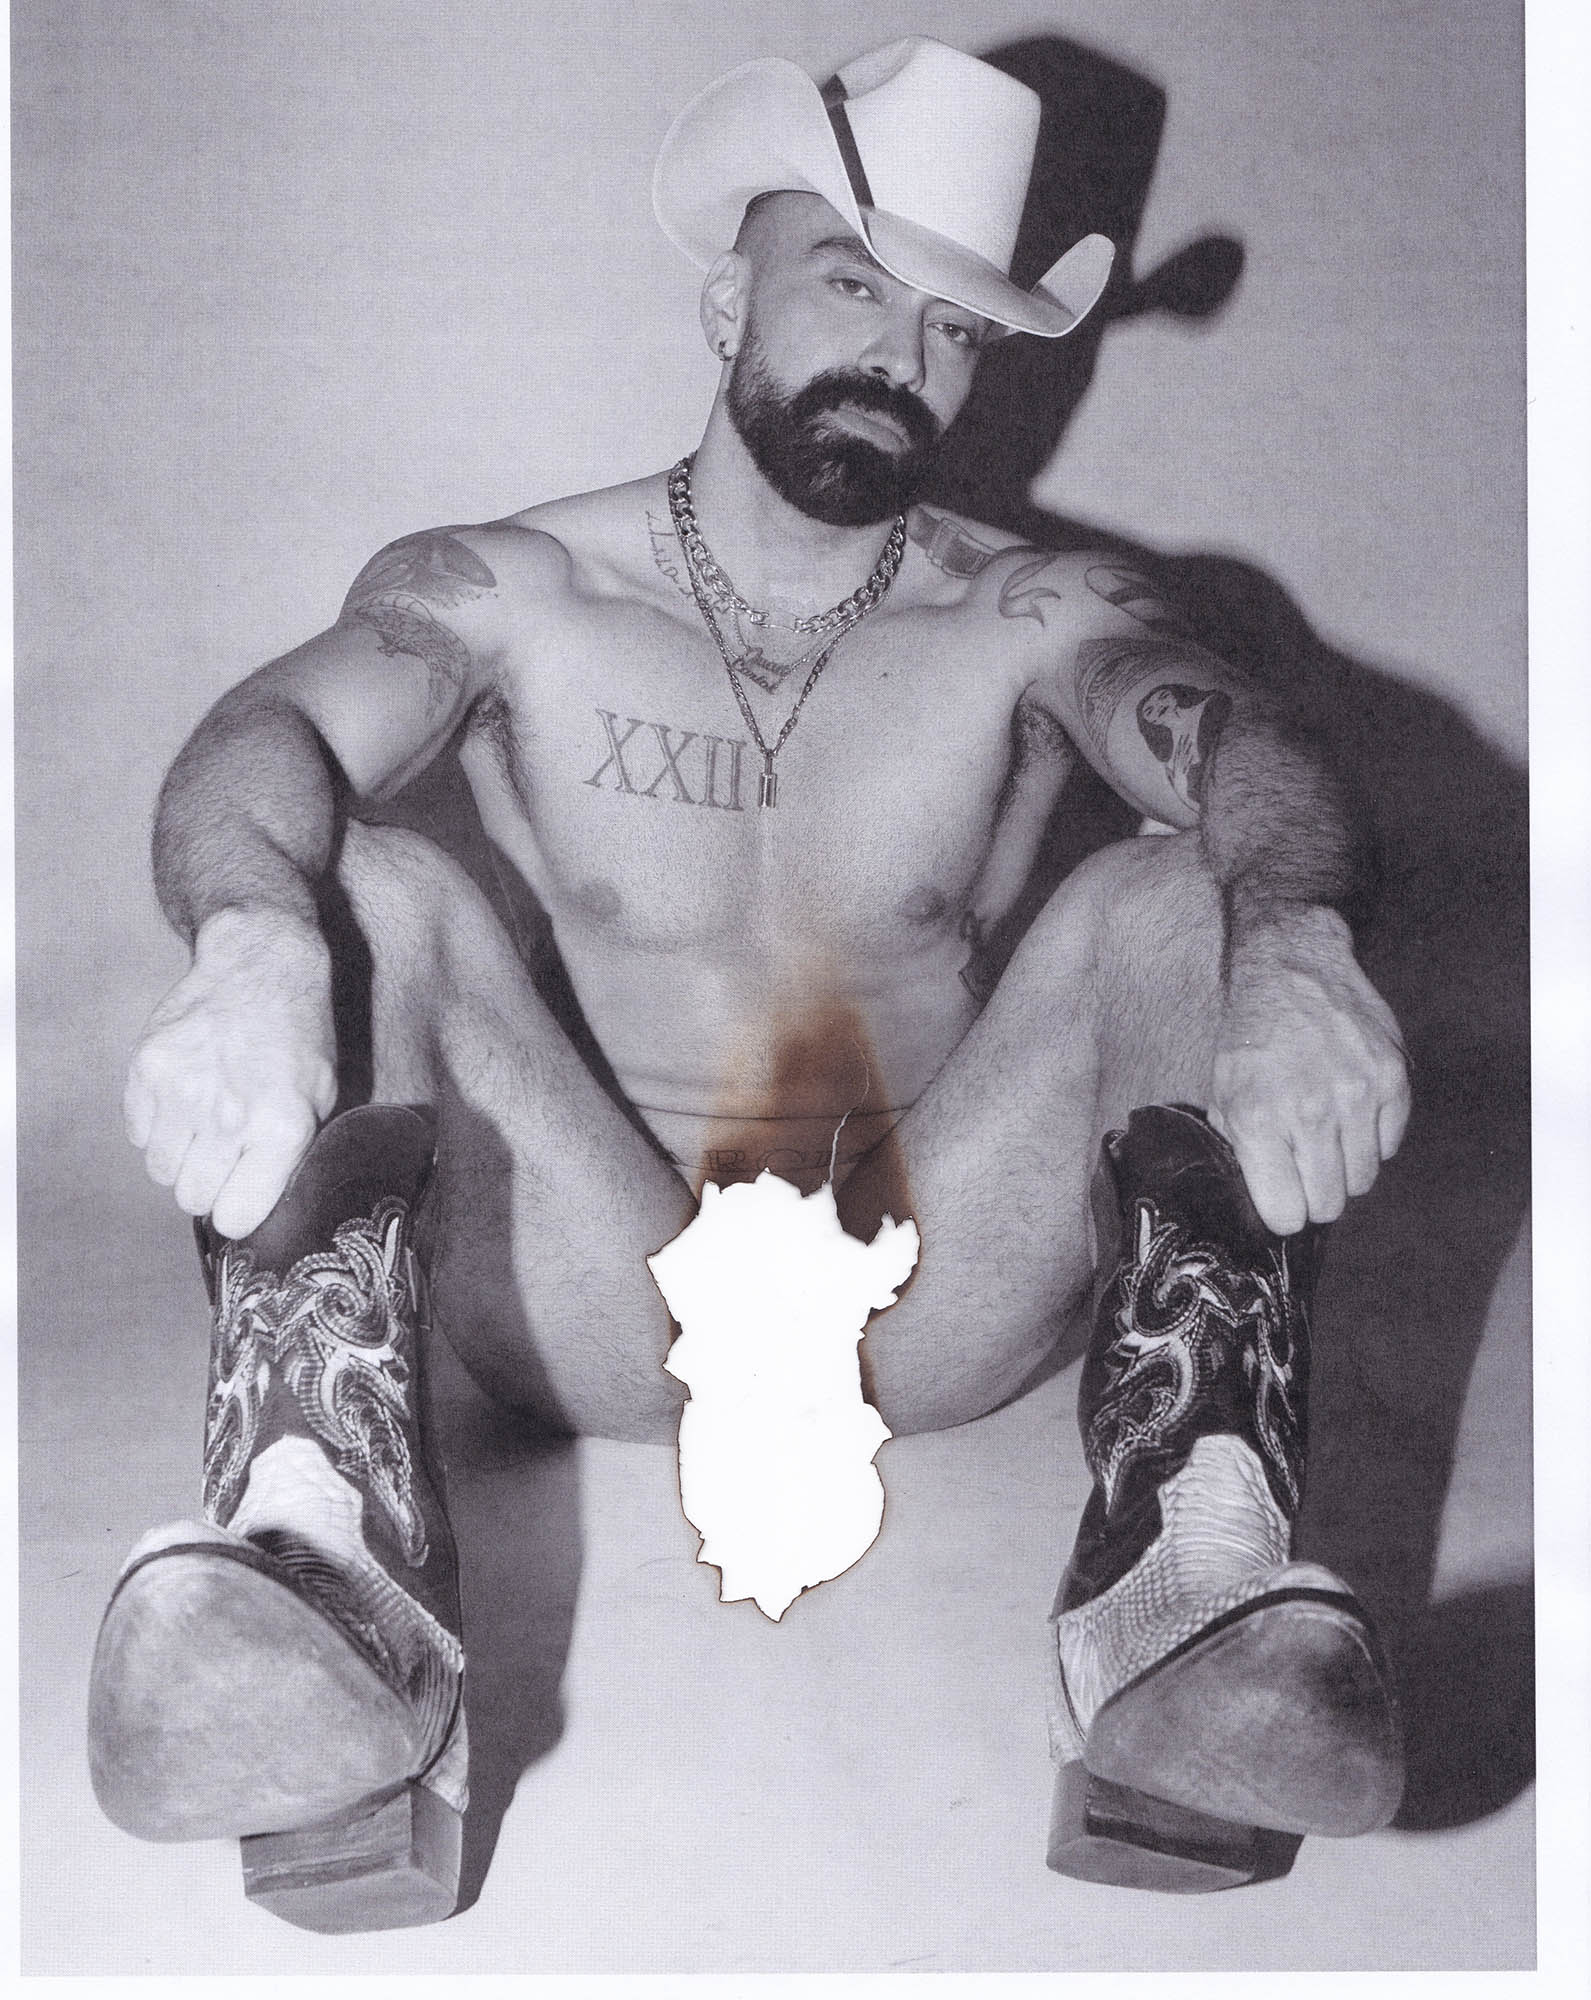 – «WHERE HAVE ALL THE COWBOYS GONE?» – Juan Carlos Plascencia by Eugenio Andrade Schulz.